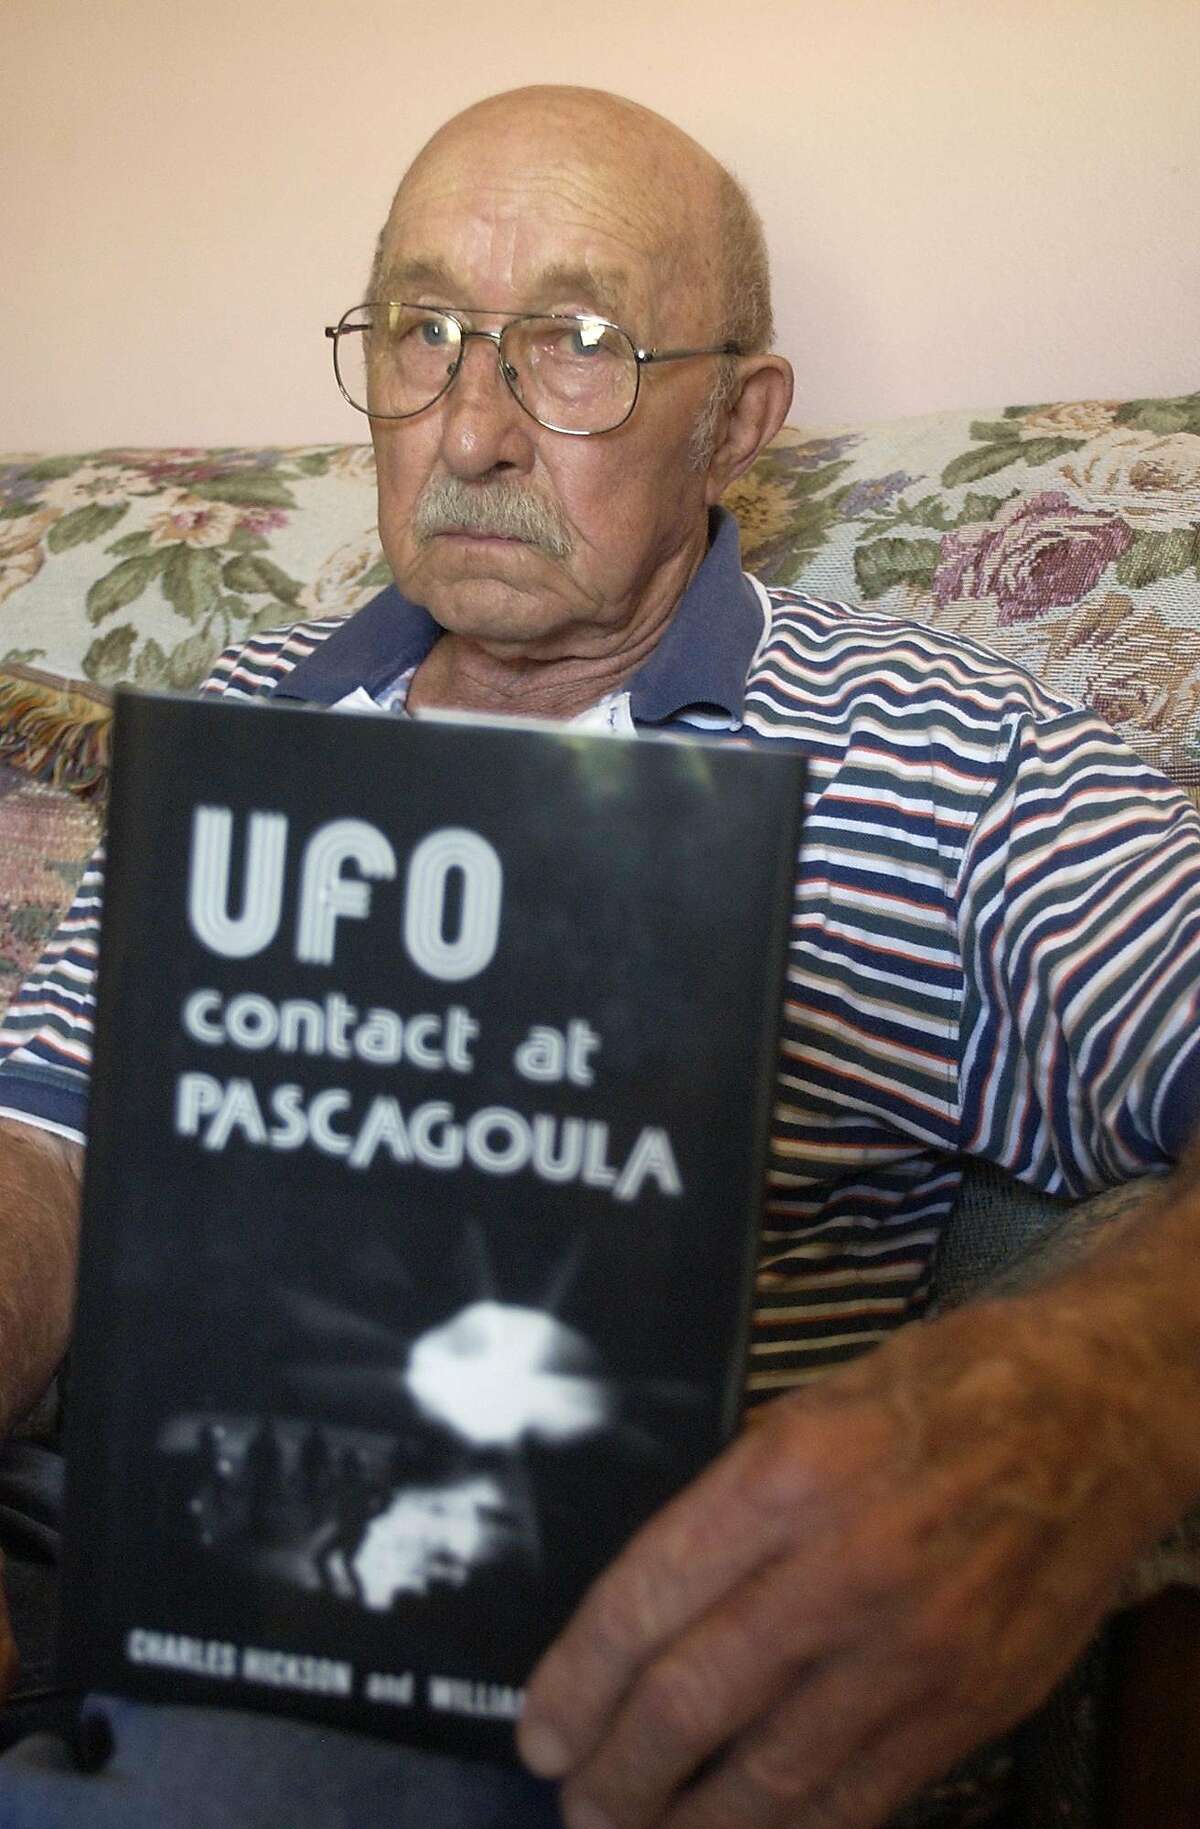 Charles Hickson poses with his book "UFO Contact at Pascagoula," Oct. 3, 2003, in Pascagoula, Miss. For 30 years, Hickson has told the story of how he was catapulted into celebrity when, according to him, 5-foot tall, flesh-colored aliens floated him off a Pascagoula pier onto their space ship for a head-to-toe probe. (AP Photo/The Mississippi Press, Carisa McCain)